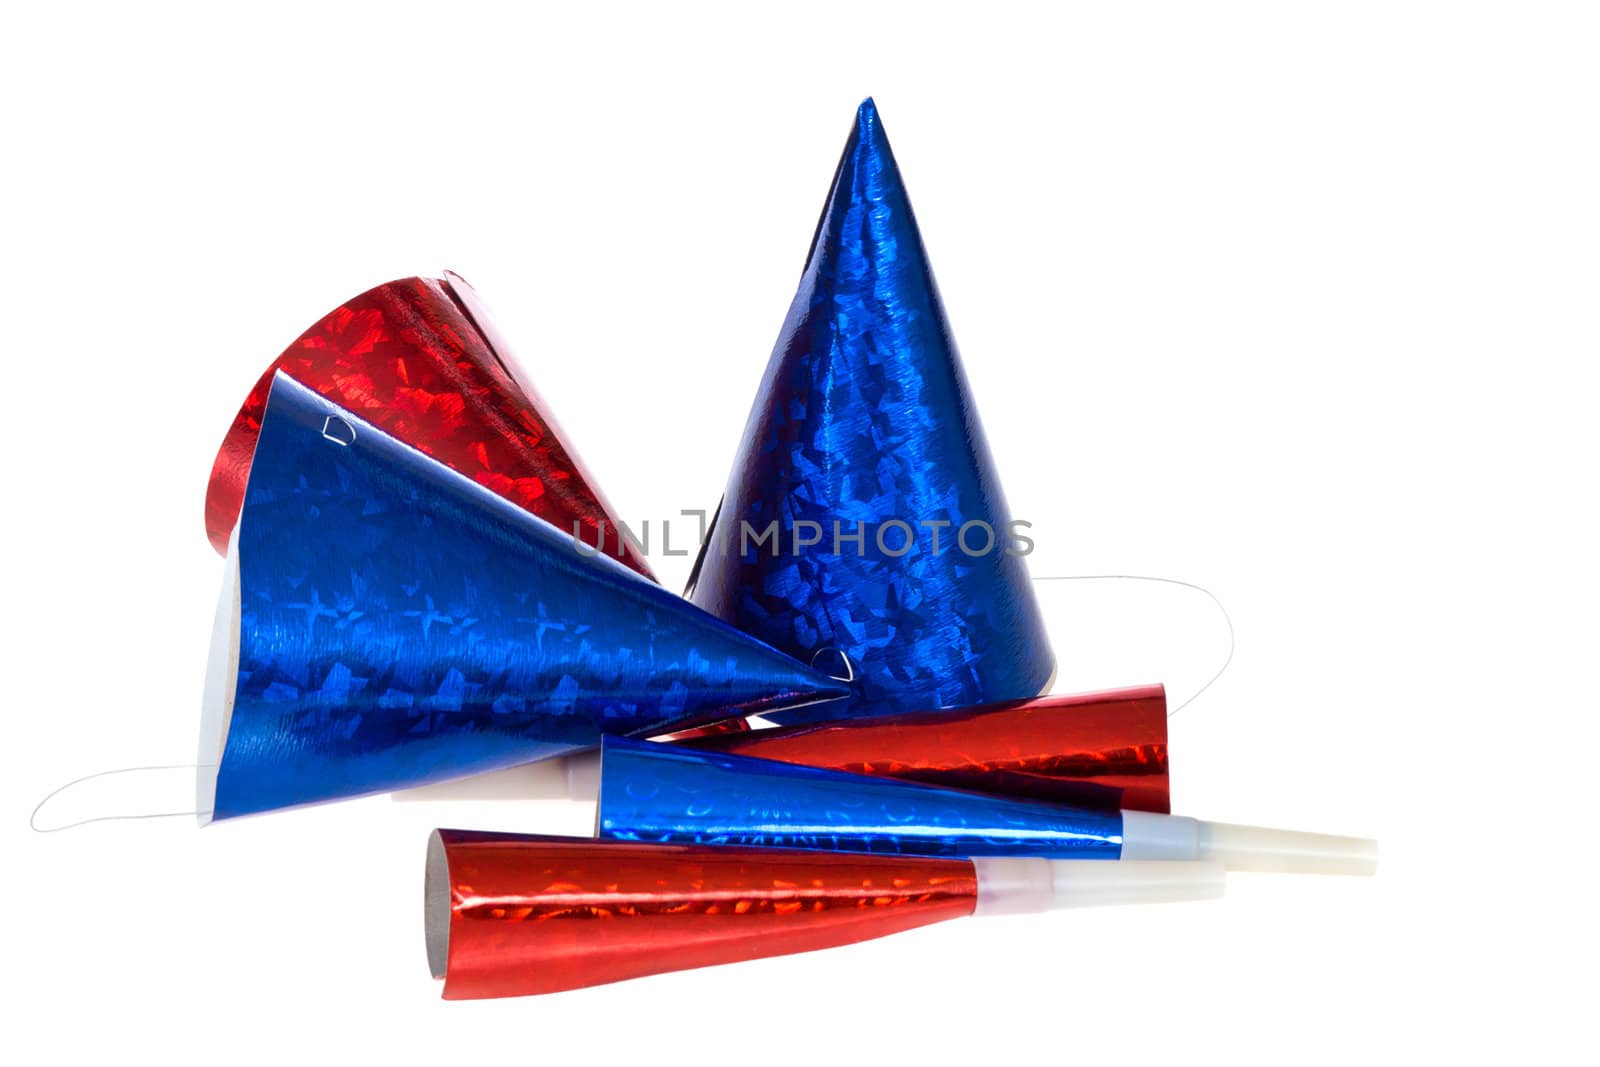 party items, photo on the white background